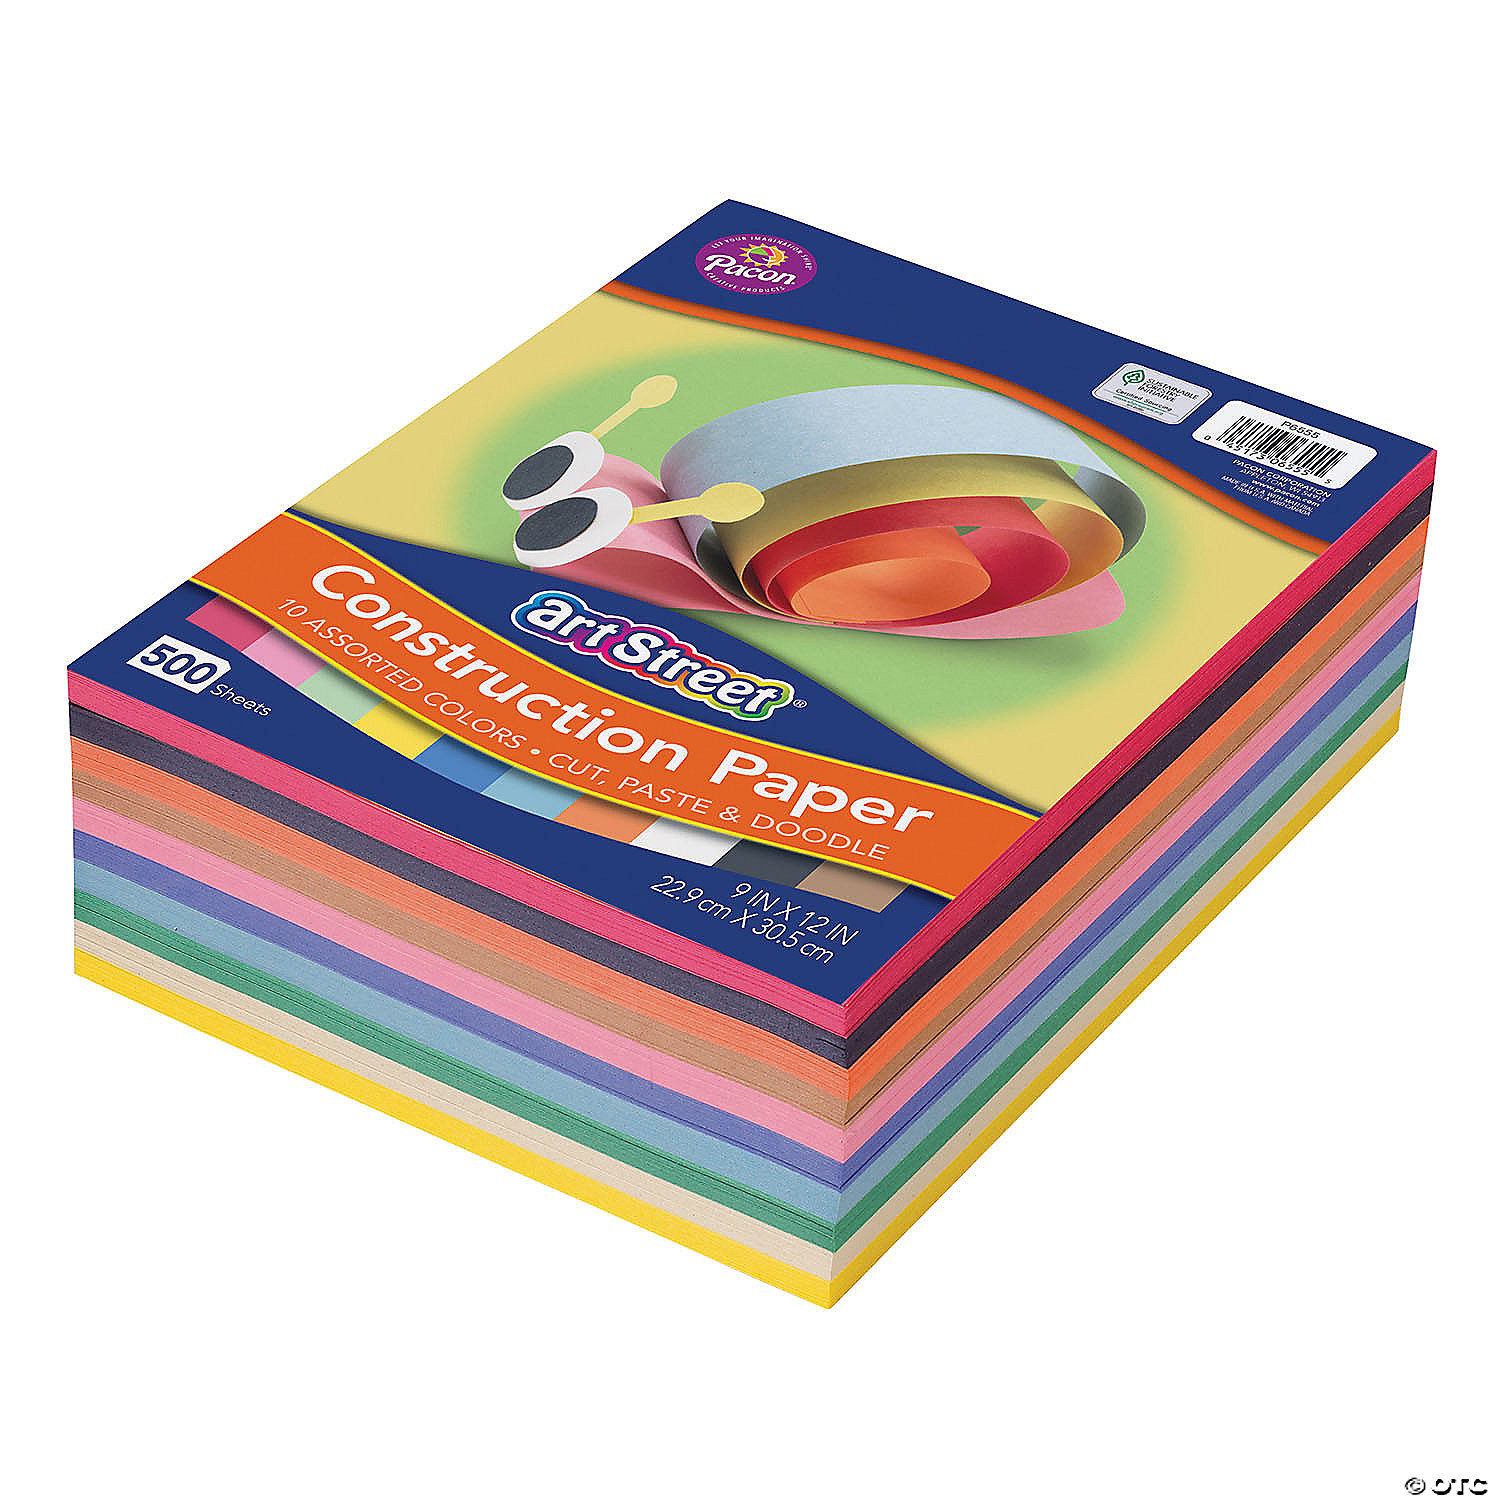 Childcraft Construction Paper Assorted Colors 9 x 12 Inches Pack of 2 500 Sheets 1465886 